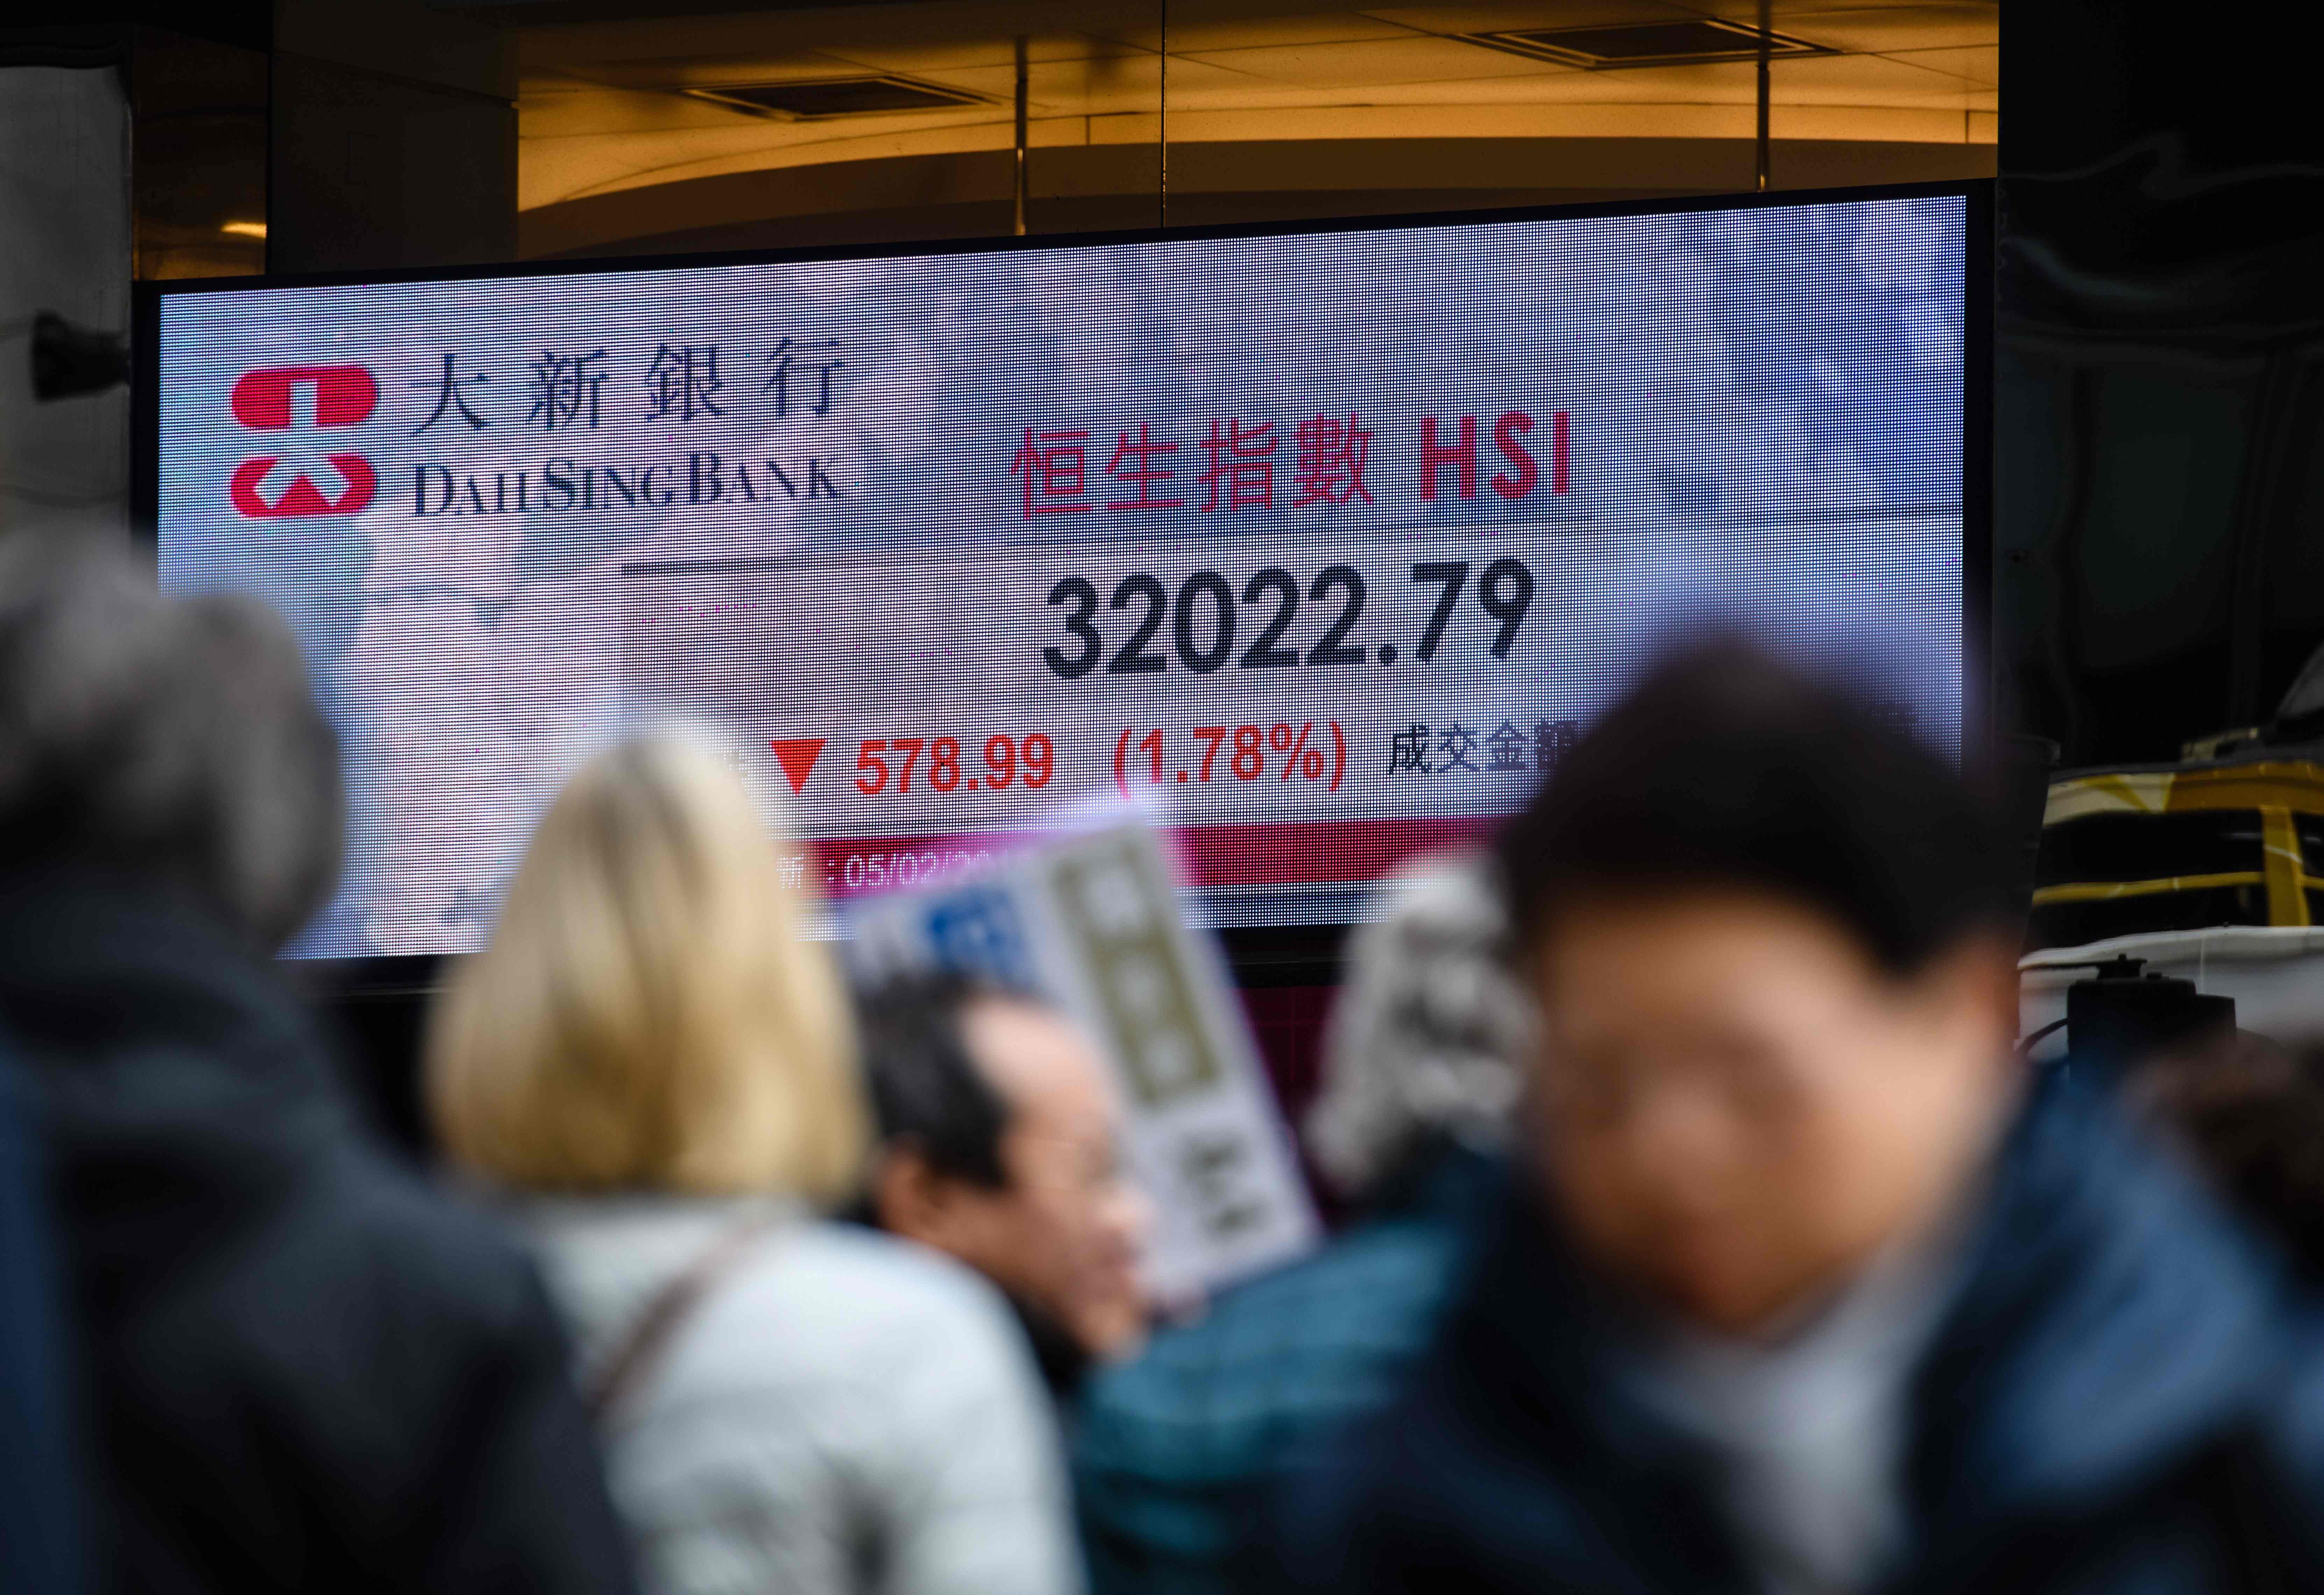 A total of 15 companies recorded 48 purchases worth HK$109 million (US$13.93 million) during February 20 to 23. Photo: AFP